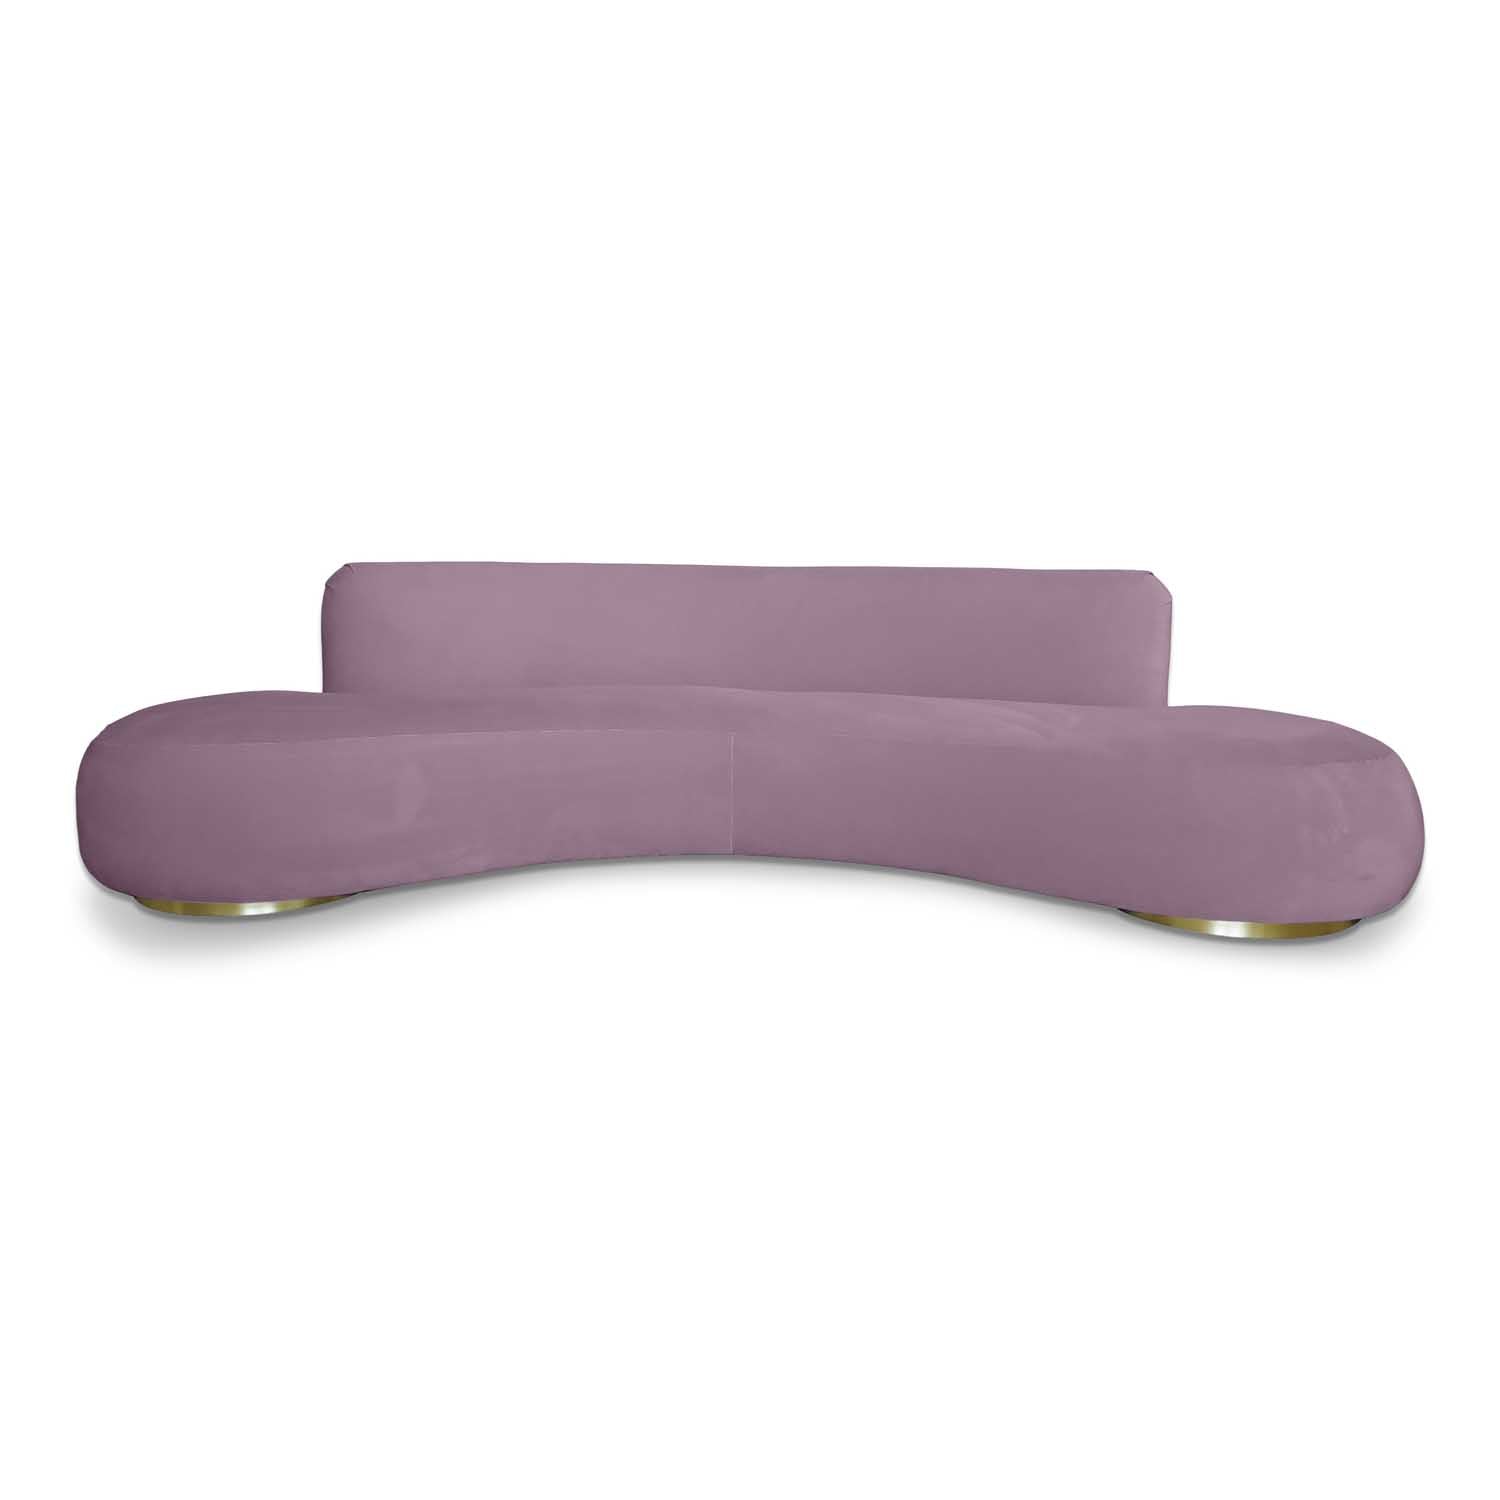 Sophisticated and Bold, pink velvet curved sofa